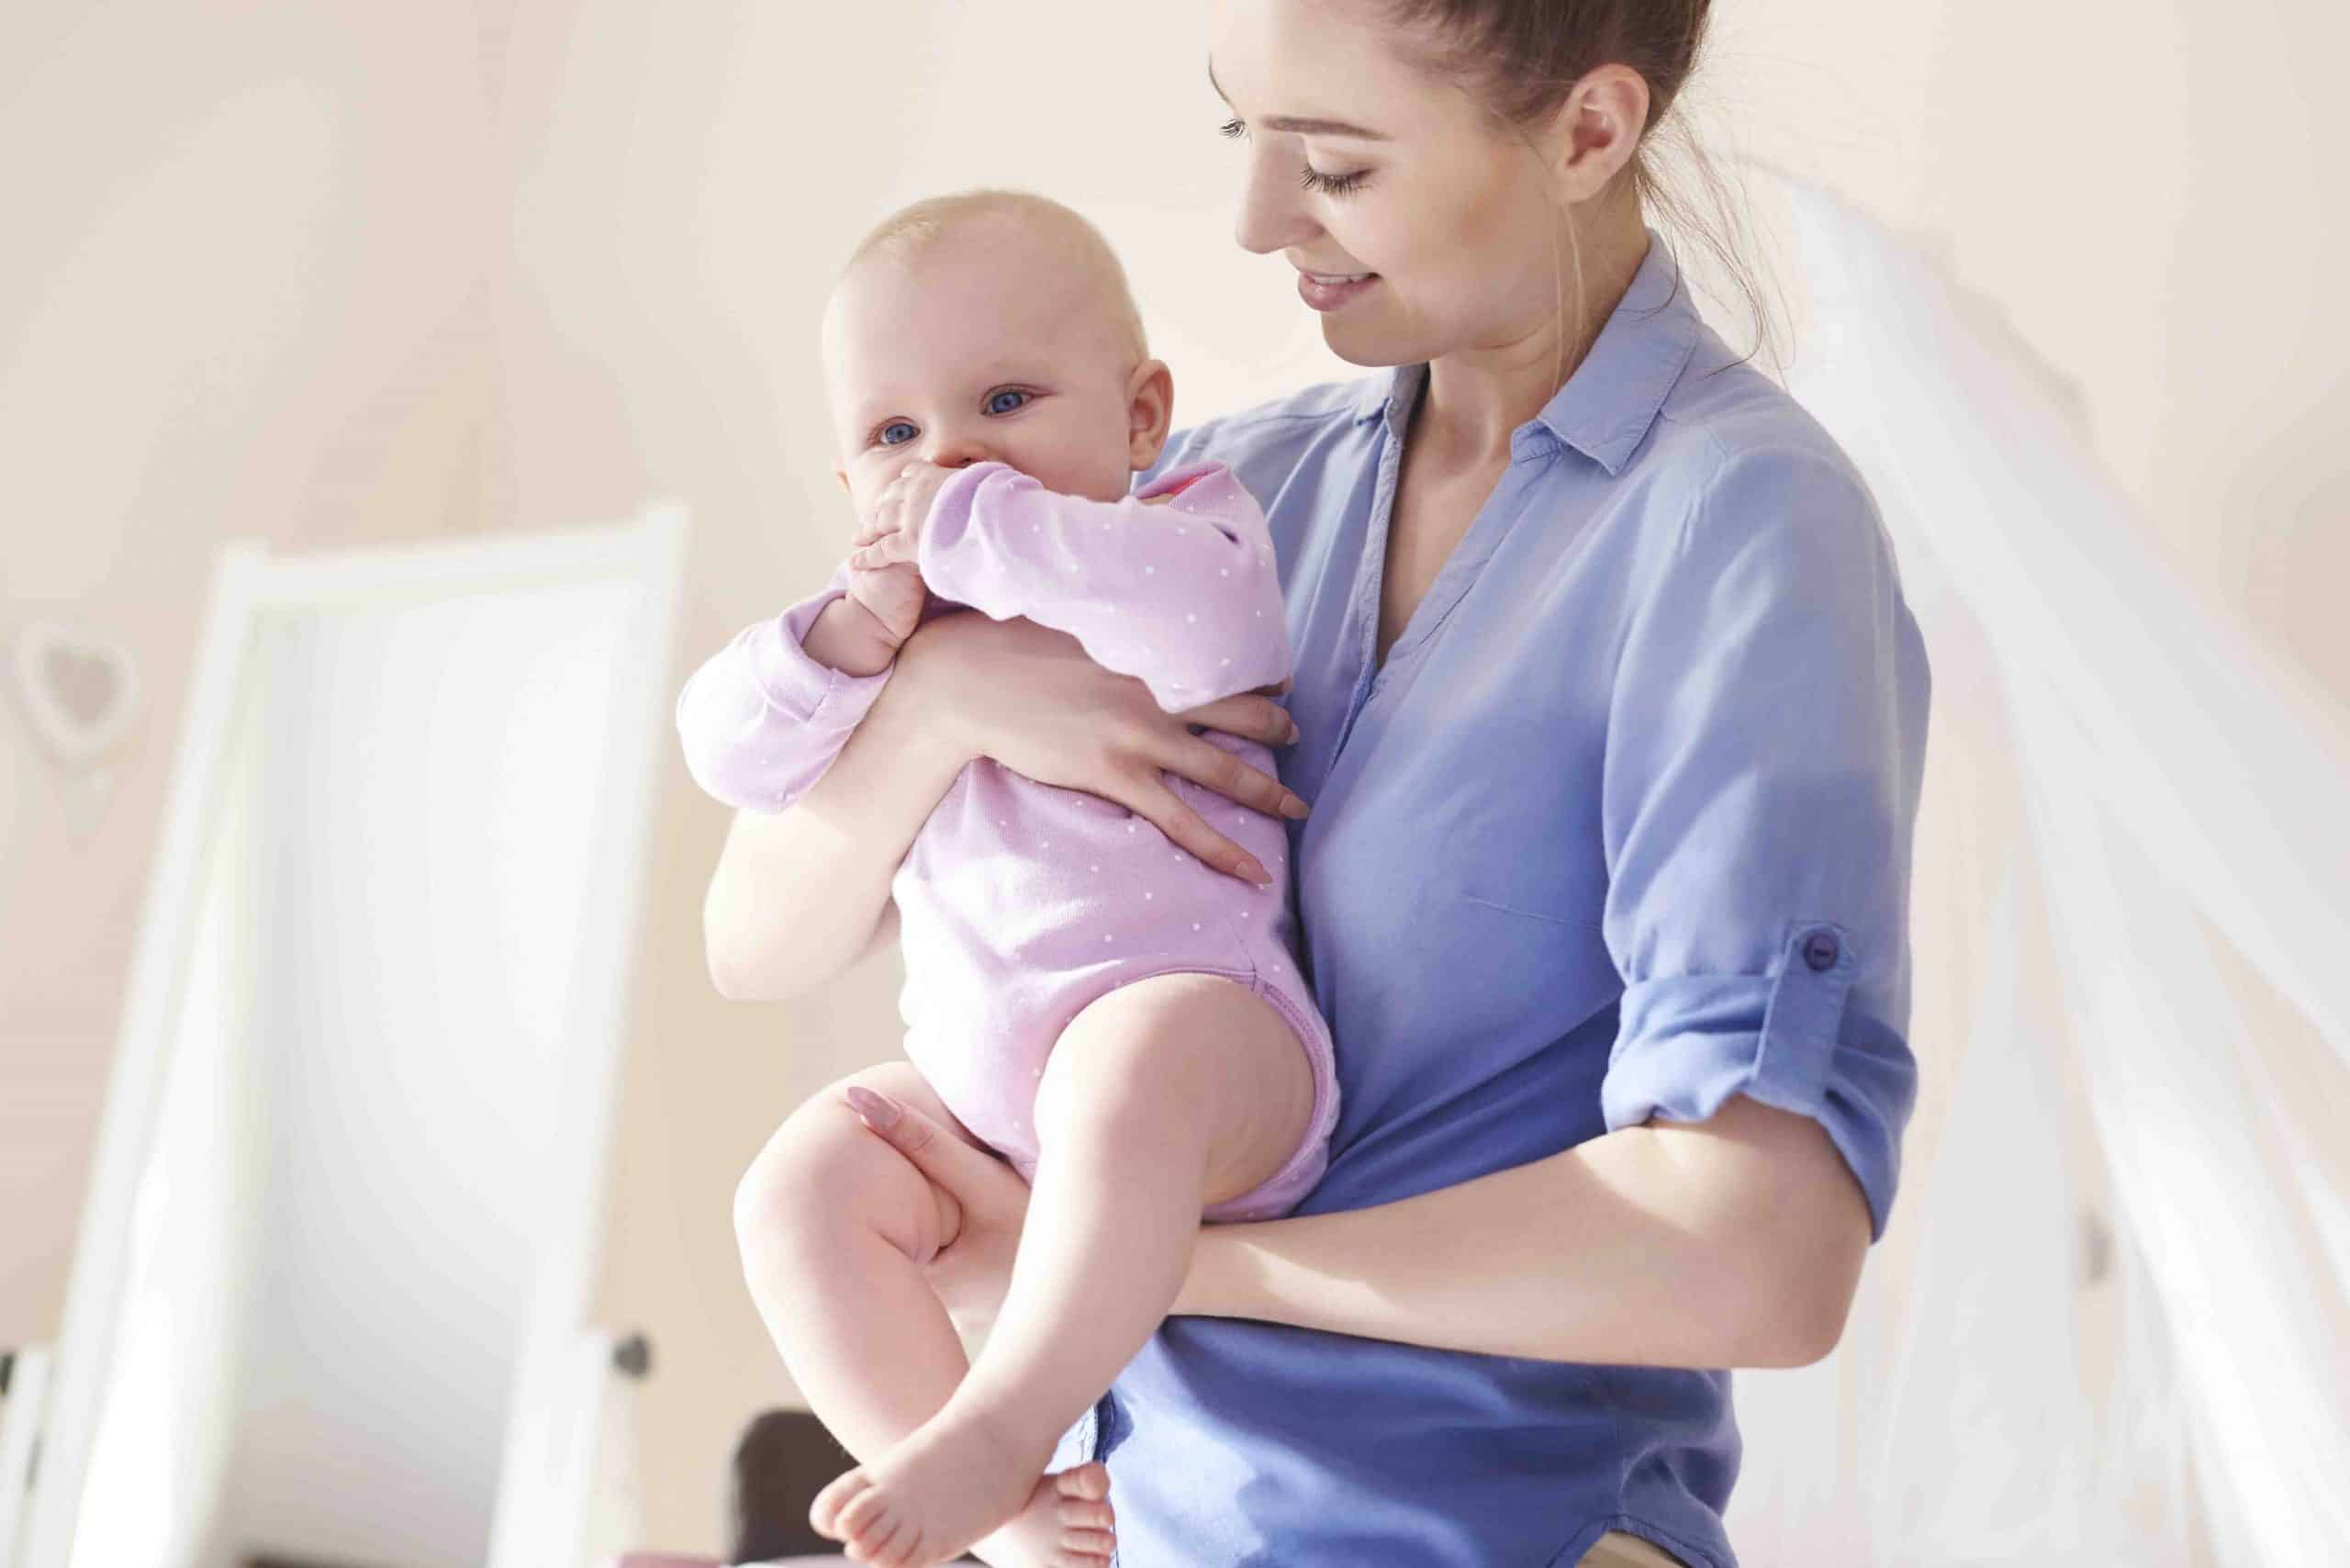 How to Stay Yourself at Maternity Leave?